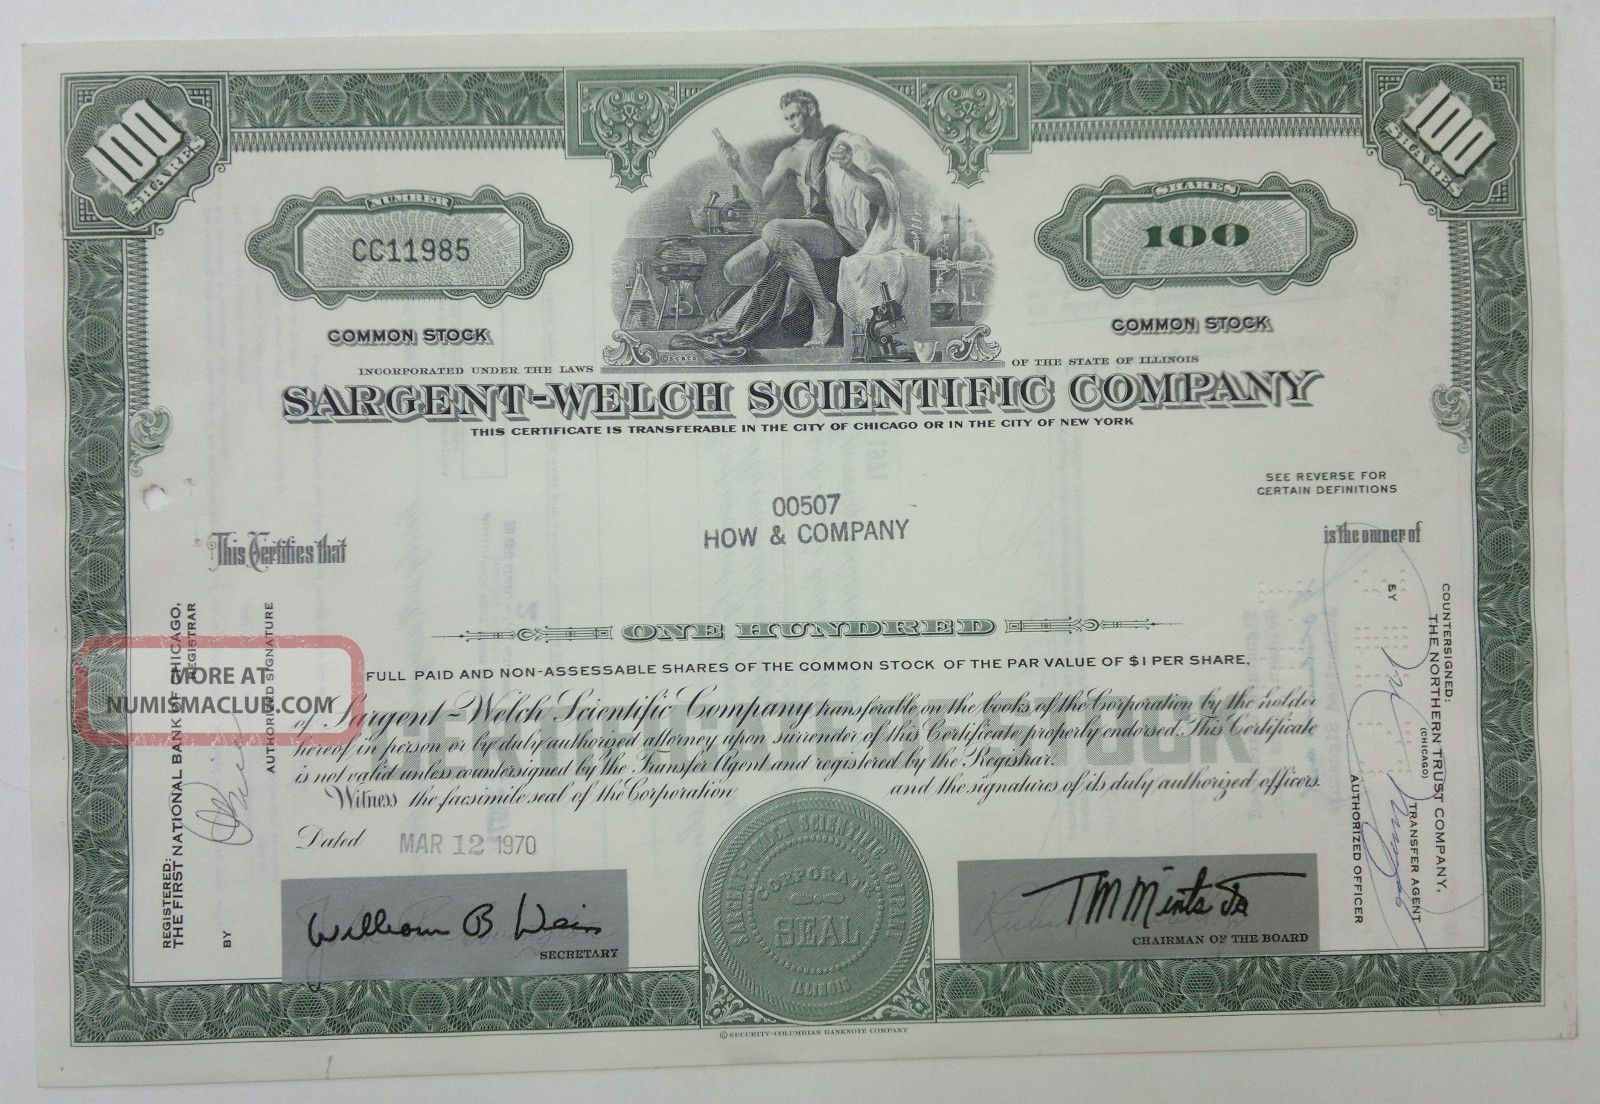 Sargent - Welch Scientific Co 1970 Share Certificate 100 Shares Stocks & Bonds, Scripophily photo